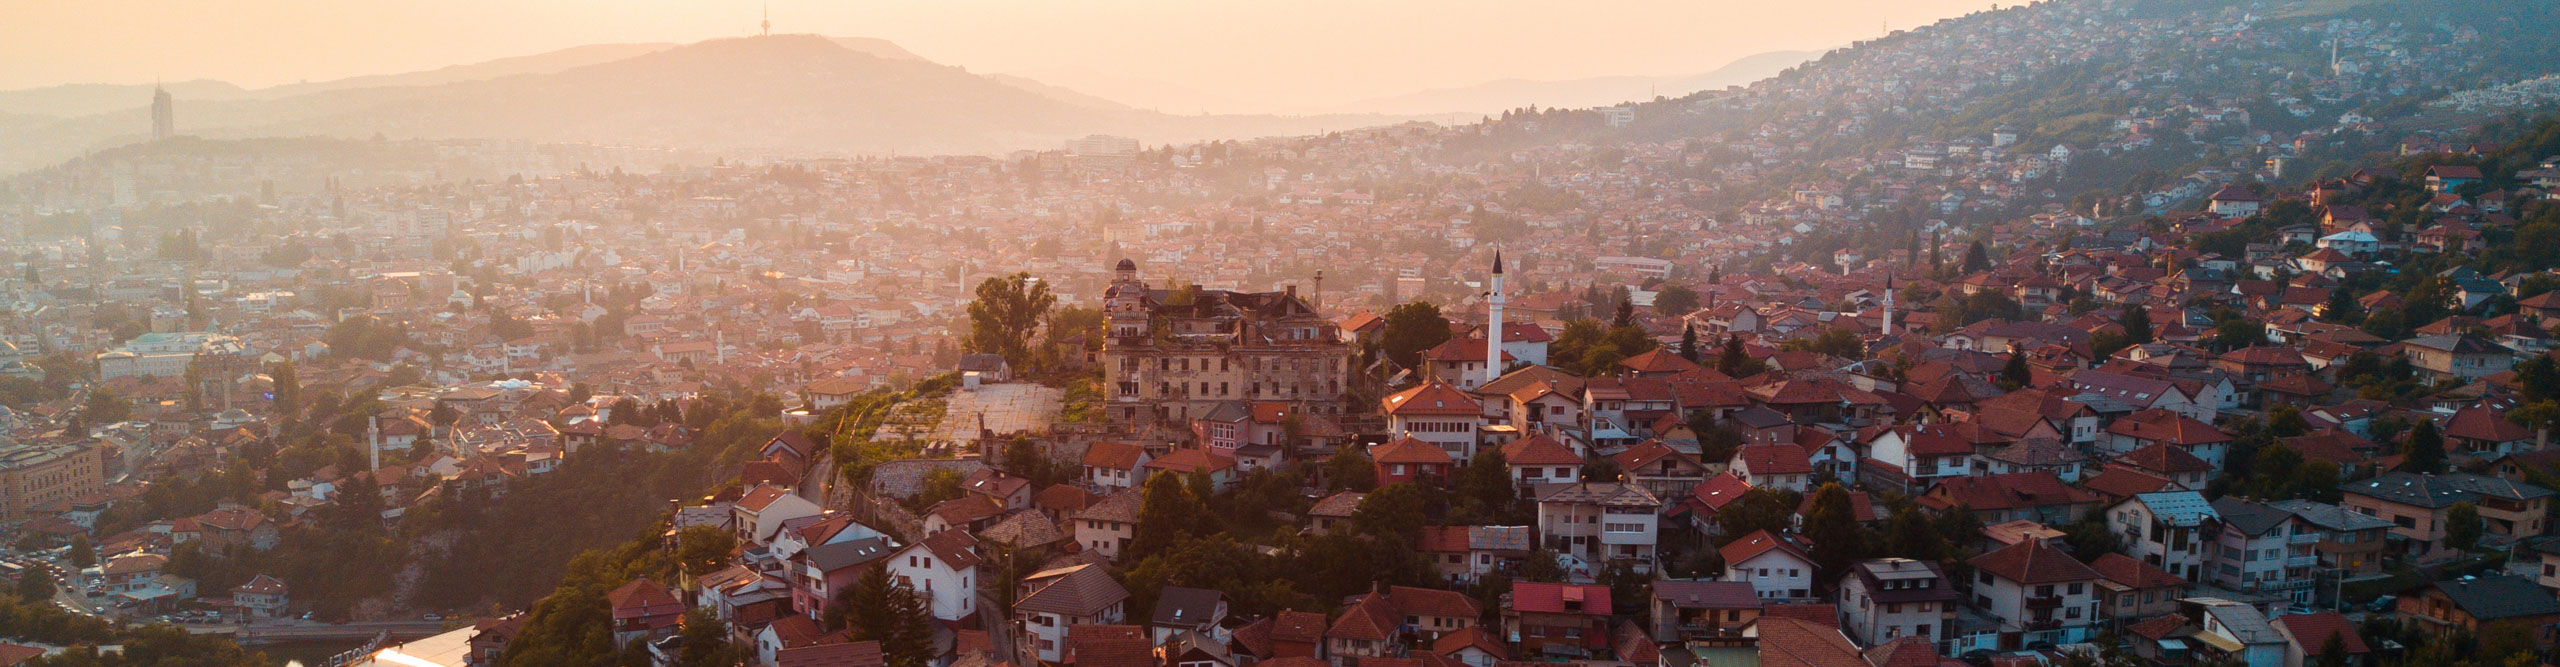 Aerial view of Sarajevo cityscape against mountain during sunset, Bosnia and Herzegovina, Europe